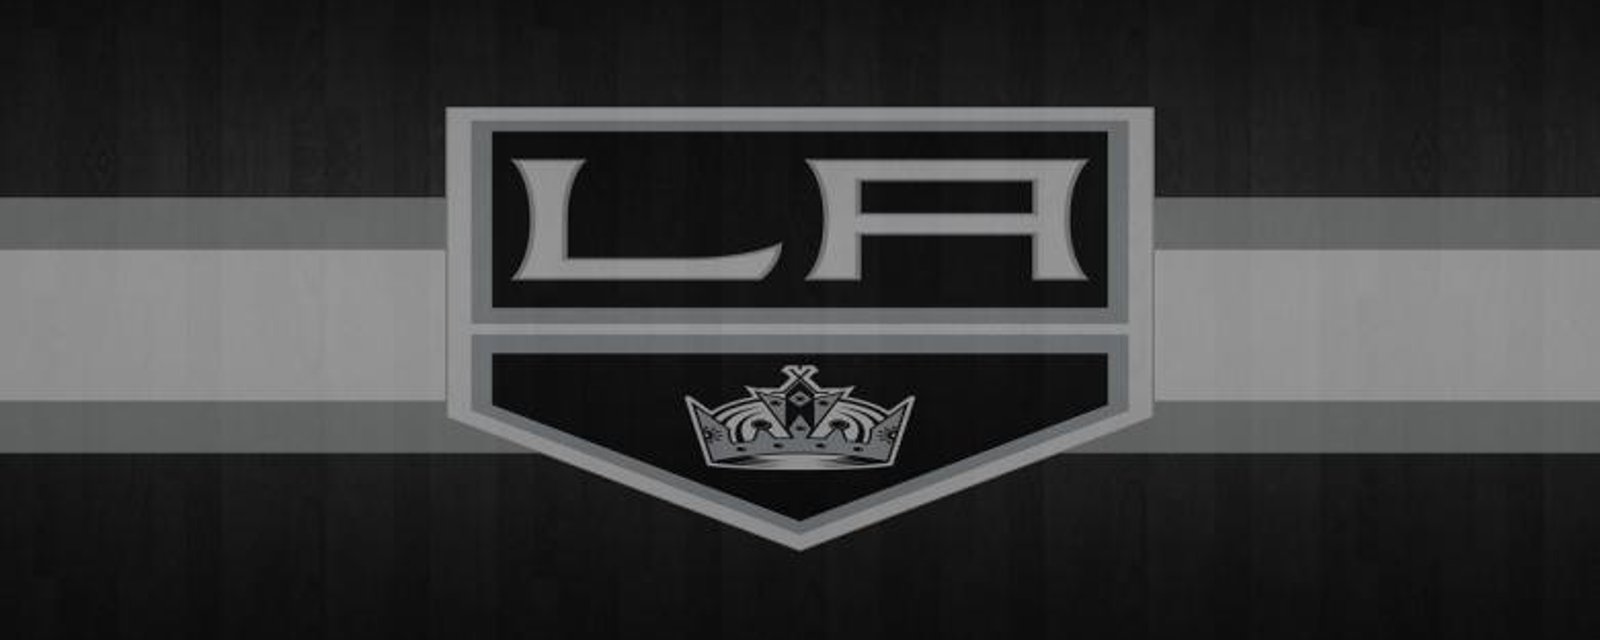 1st place on the line as Kings face the Ducks tonight